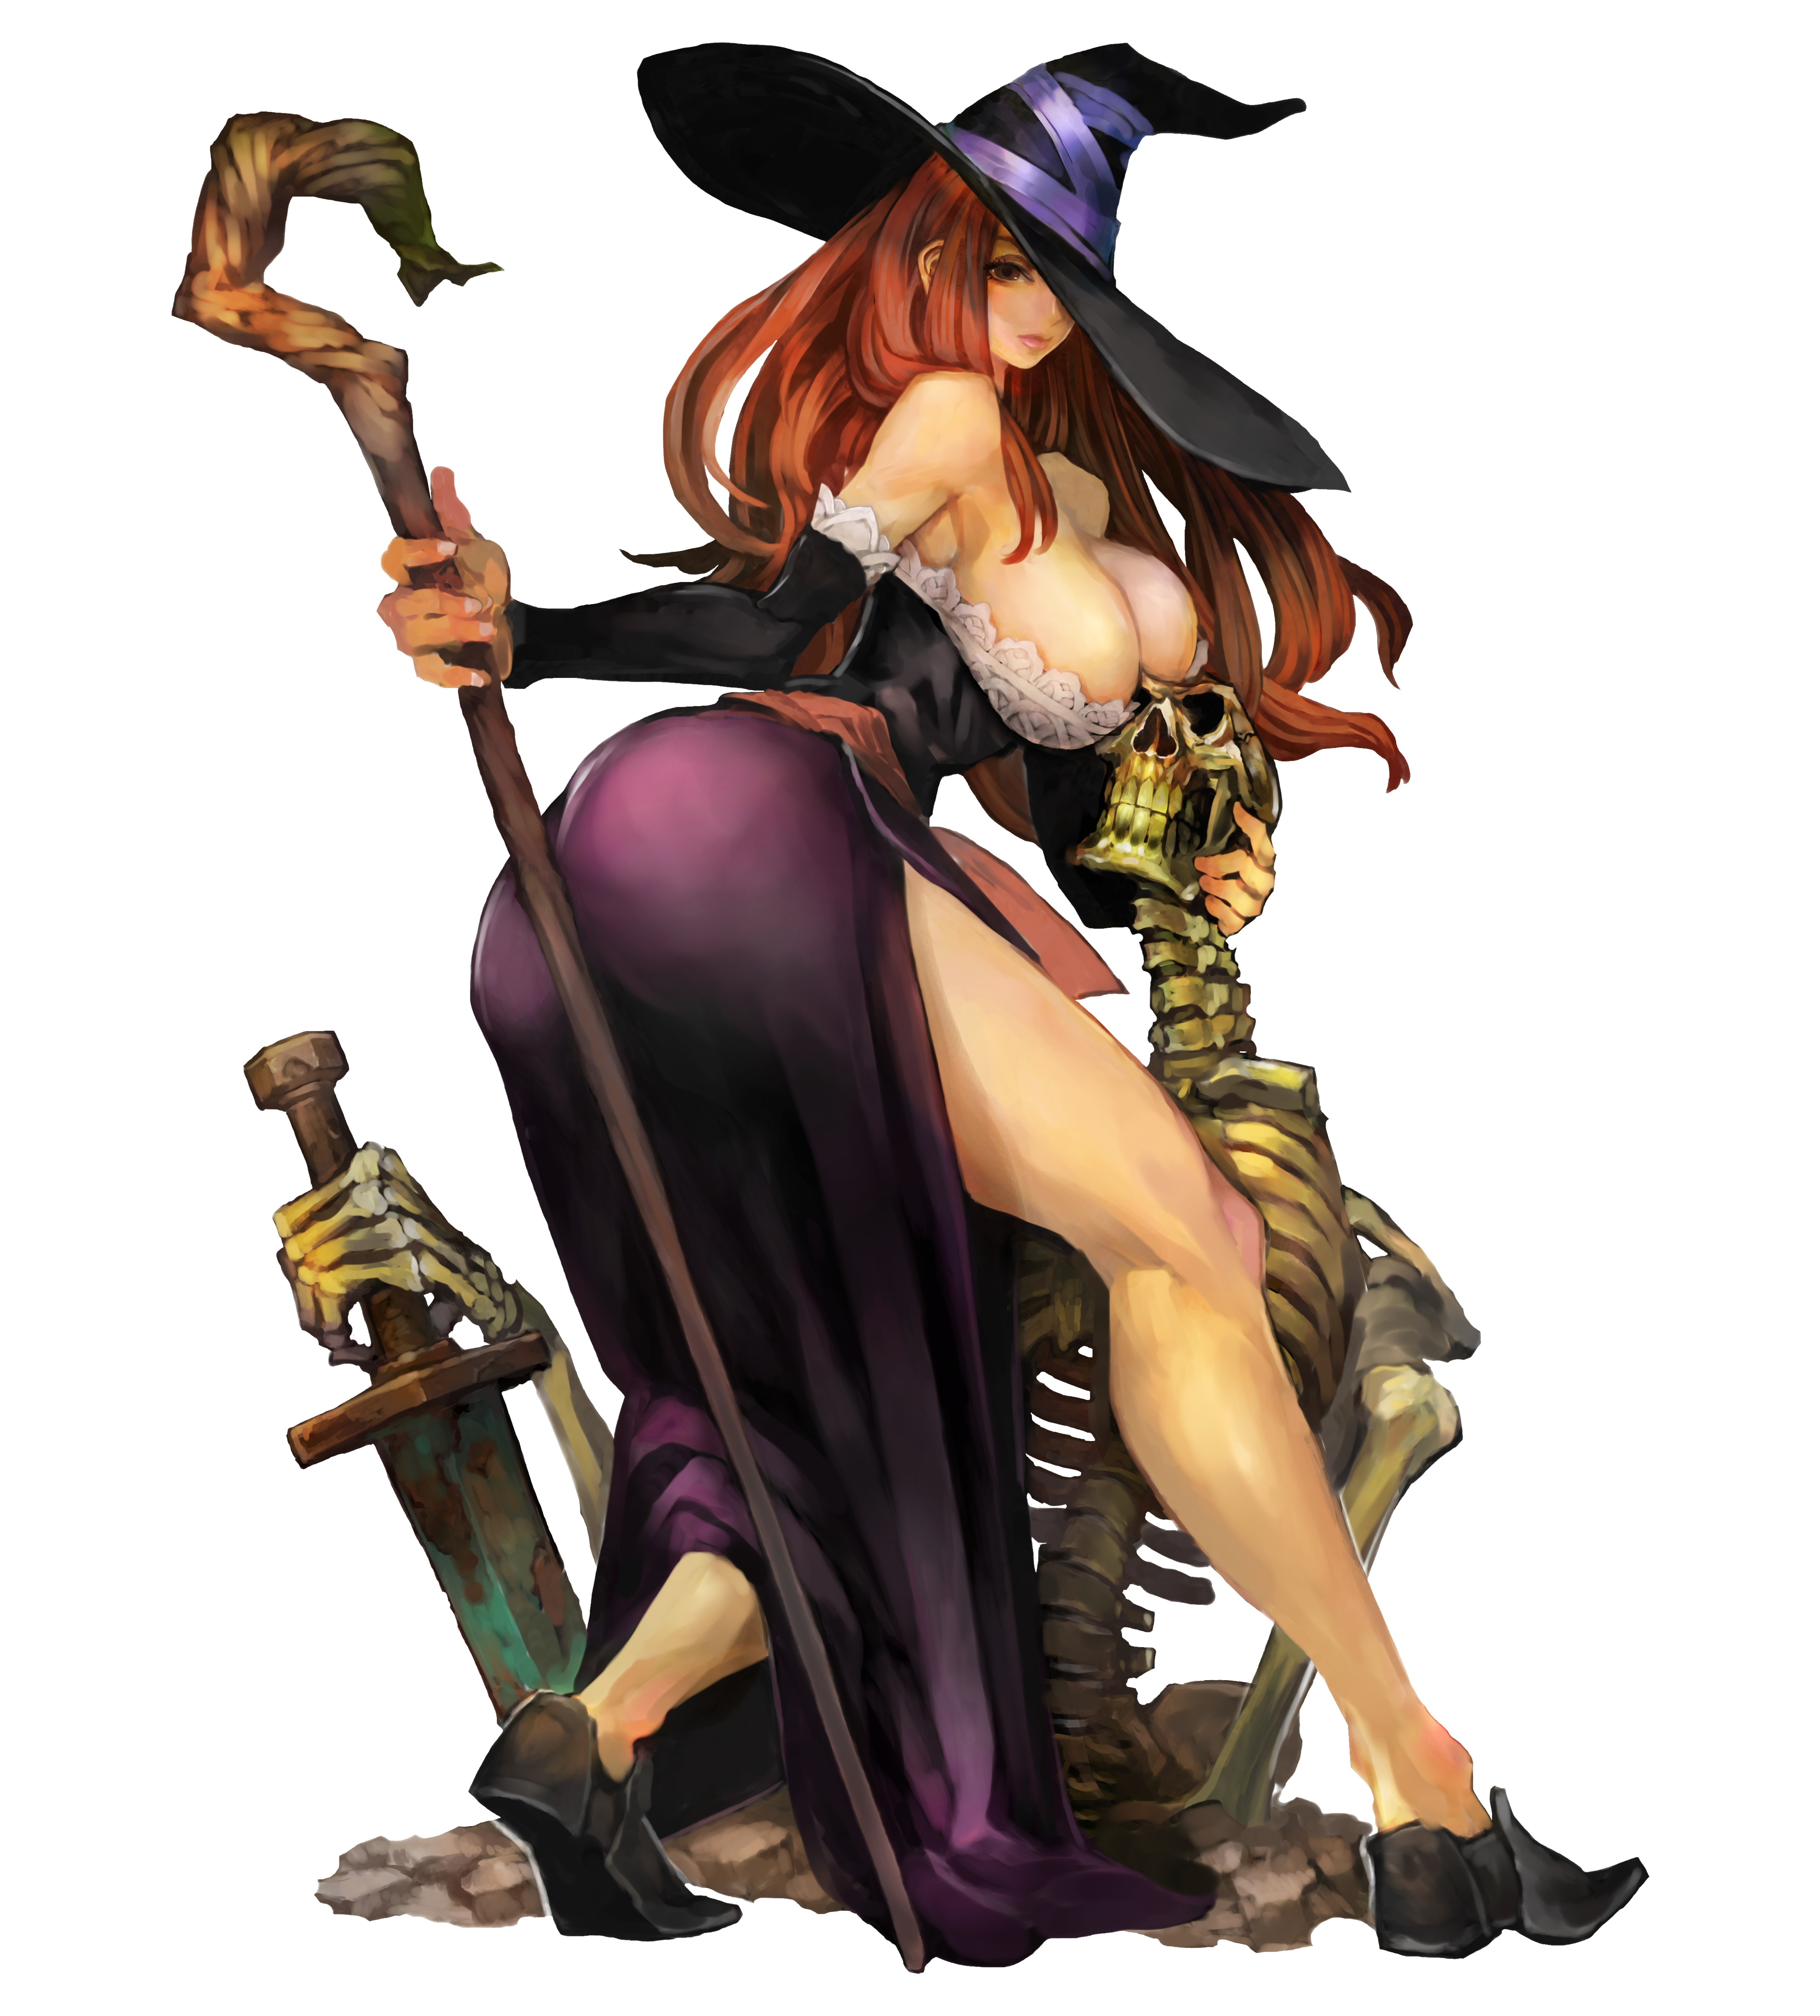 http://lunaswitchescloset.blogspot.com/2015/08/sexy-halloween-witches-i-witch-you.html